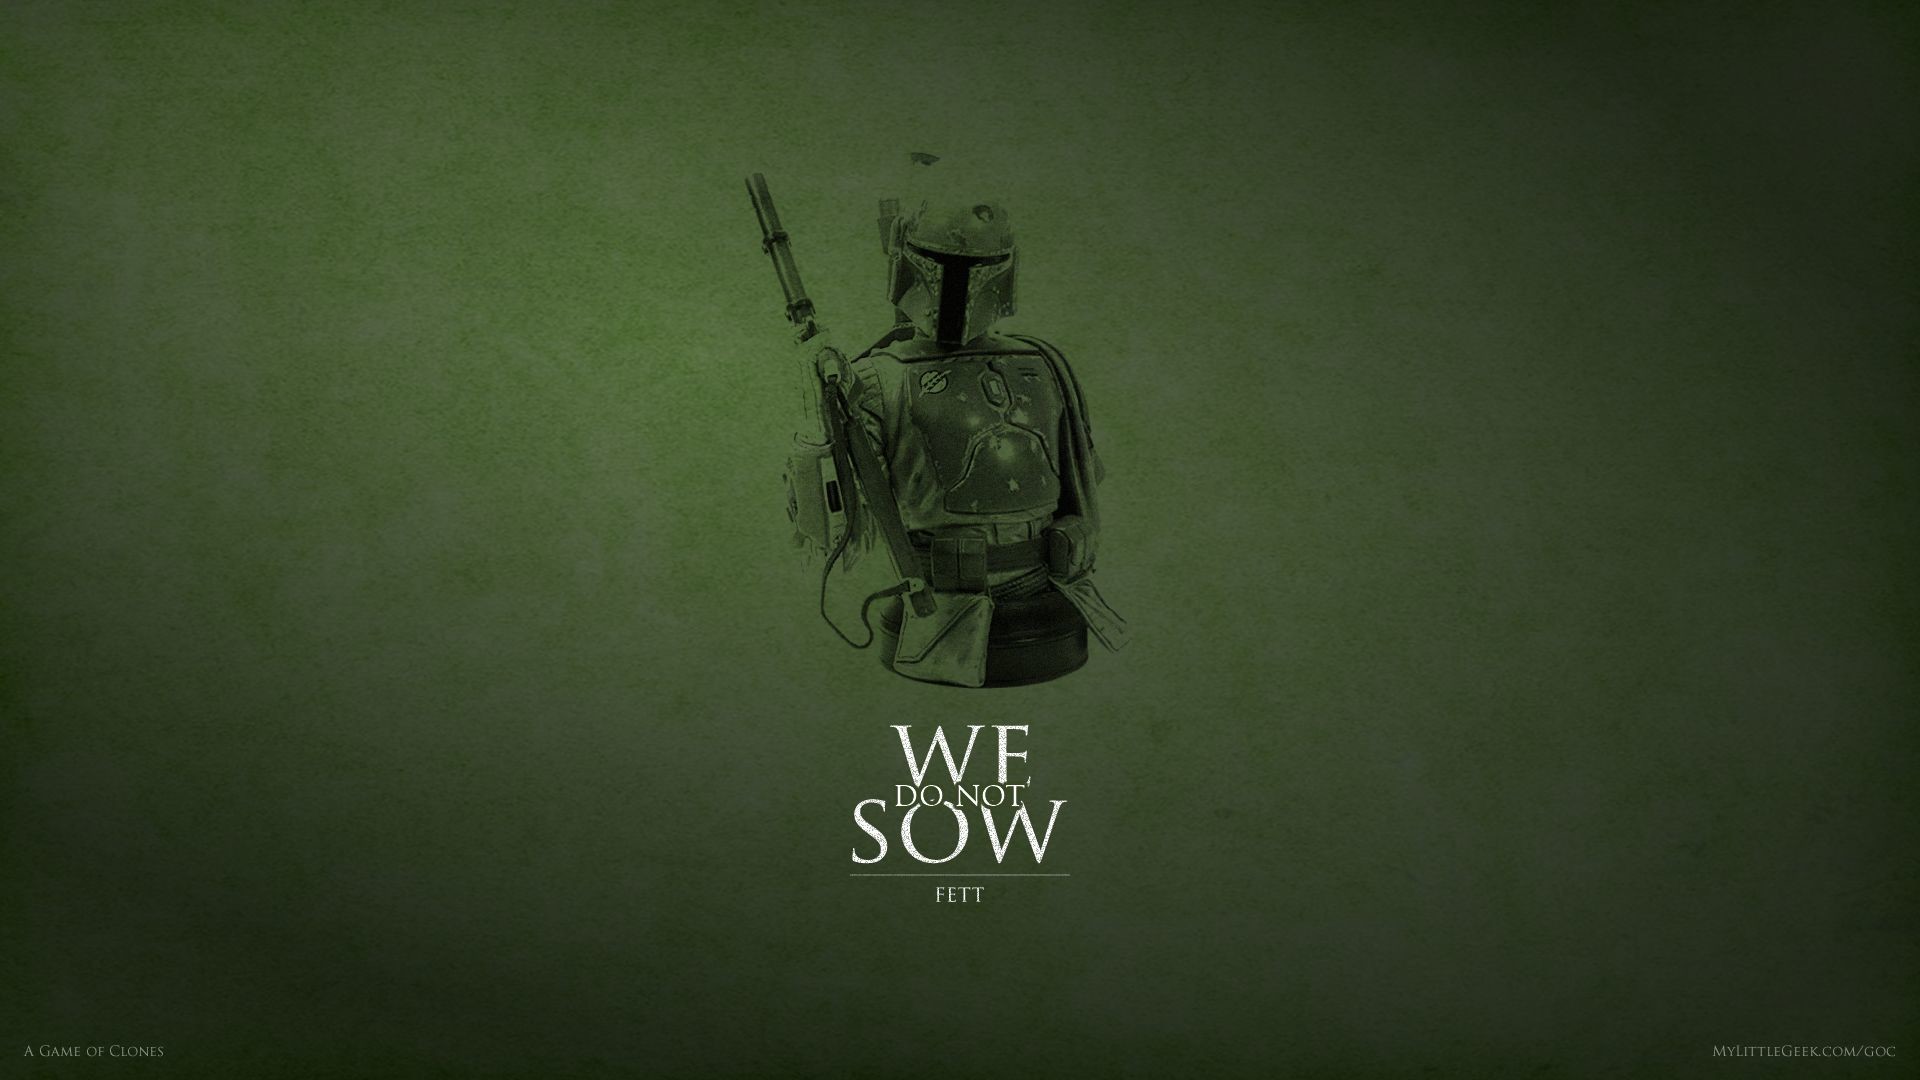 1920x1080 Game of Clones: Star Wars / Game of Thrones Mashup Wallpapers